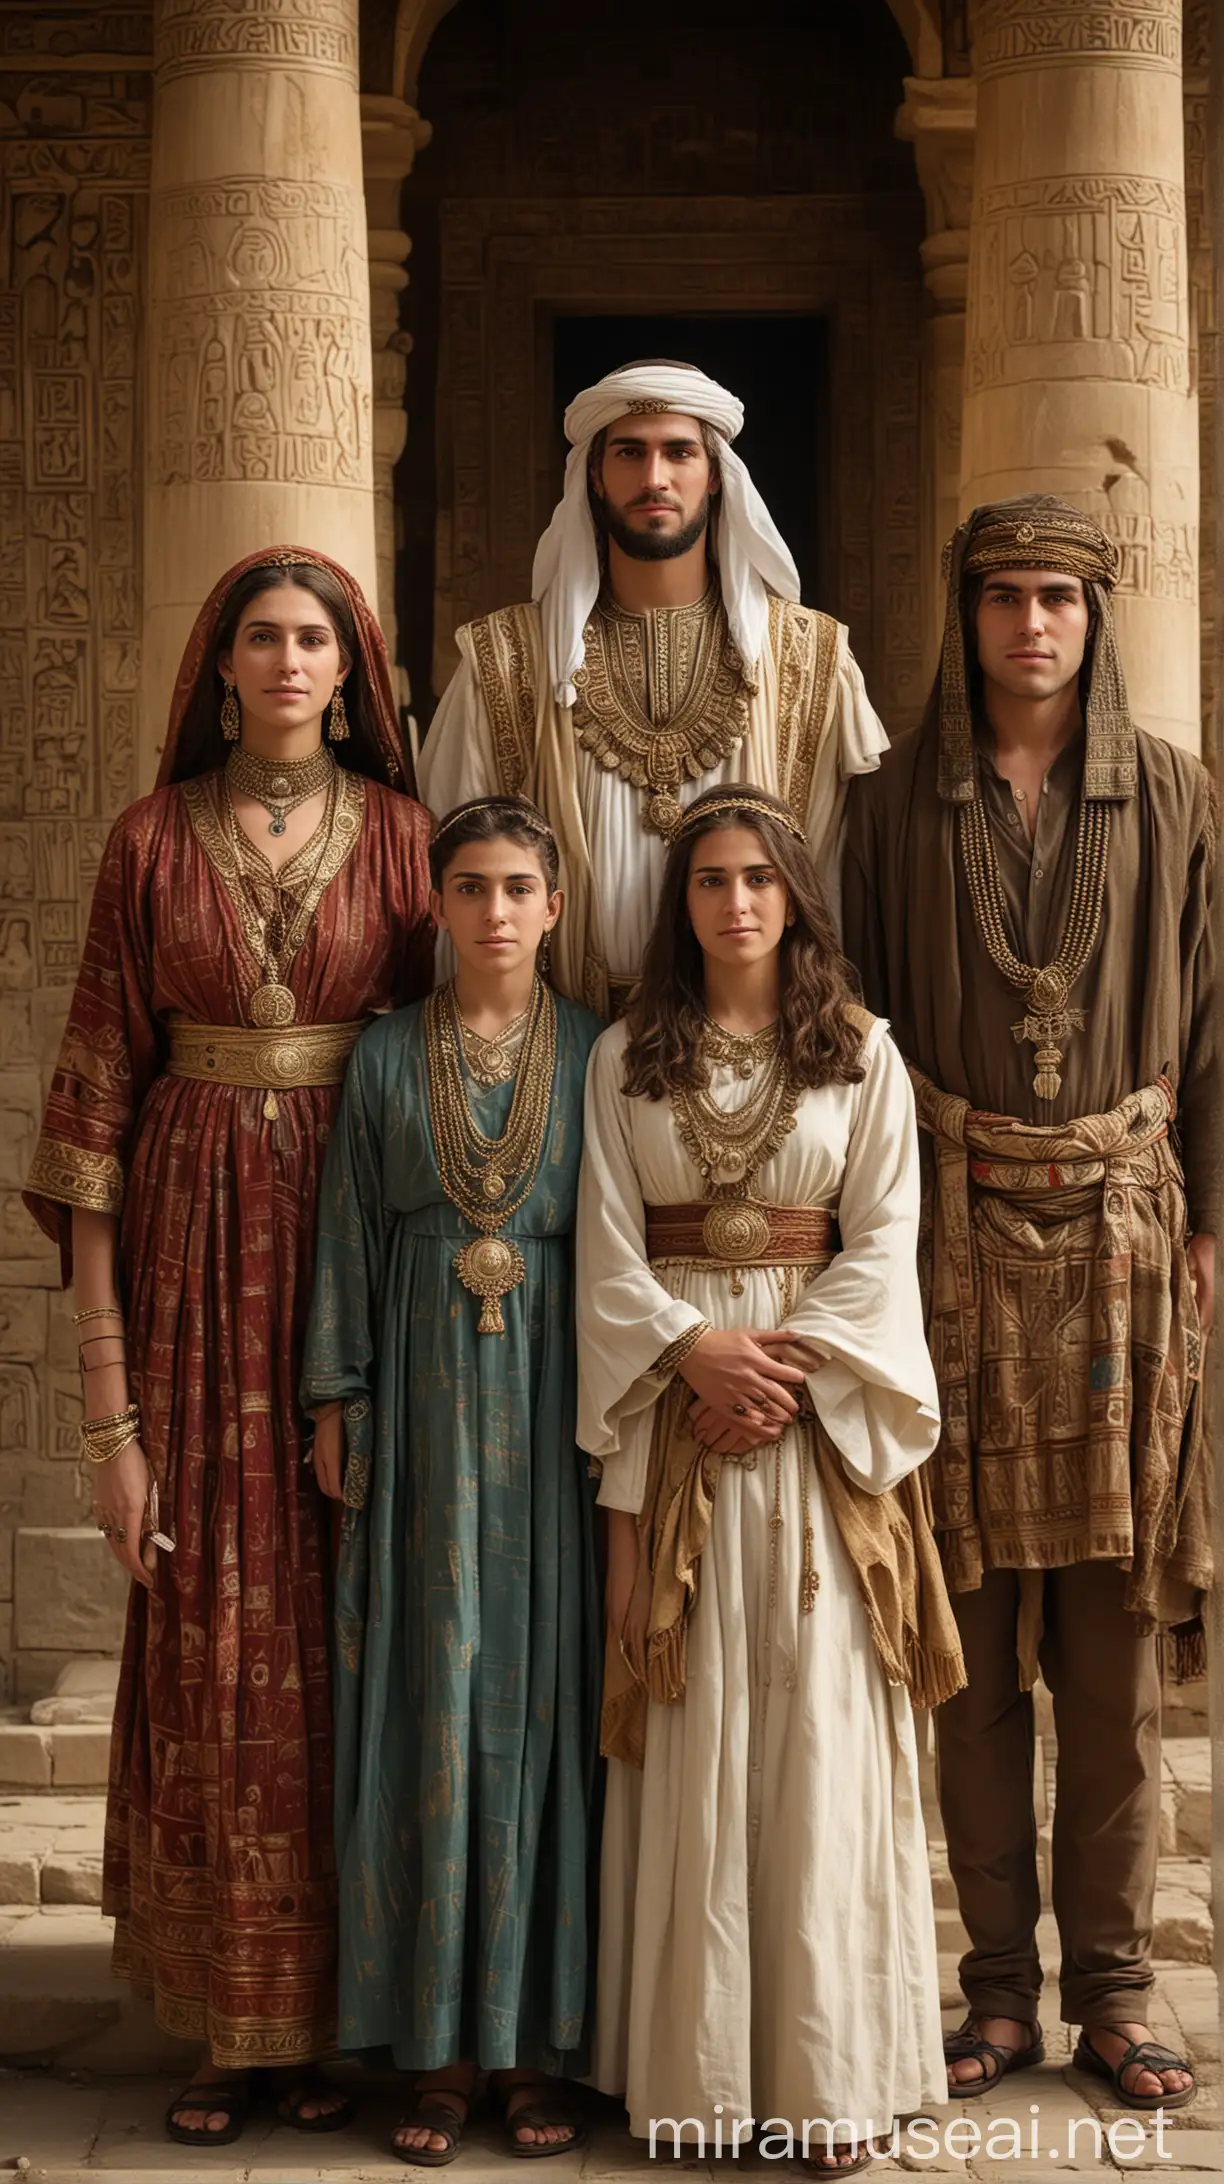 Regal Family Portrait Onan with Judah and the Canaanite Woman in Ancient 17th Century BC Setting